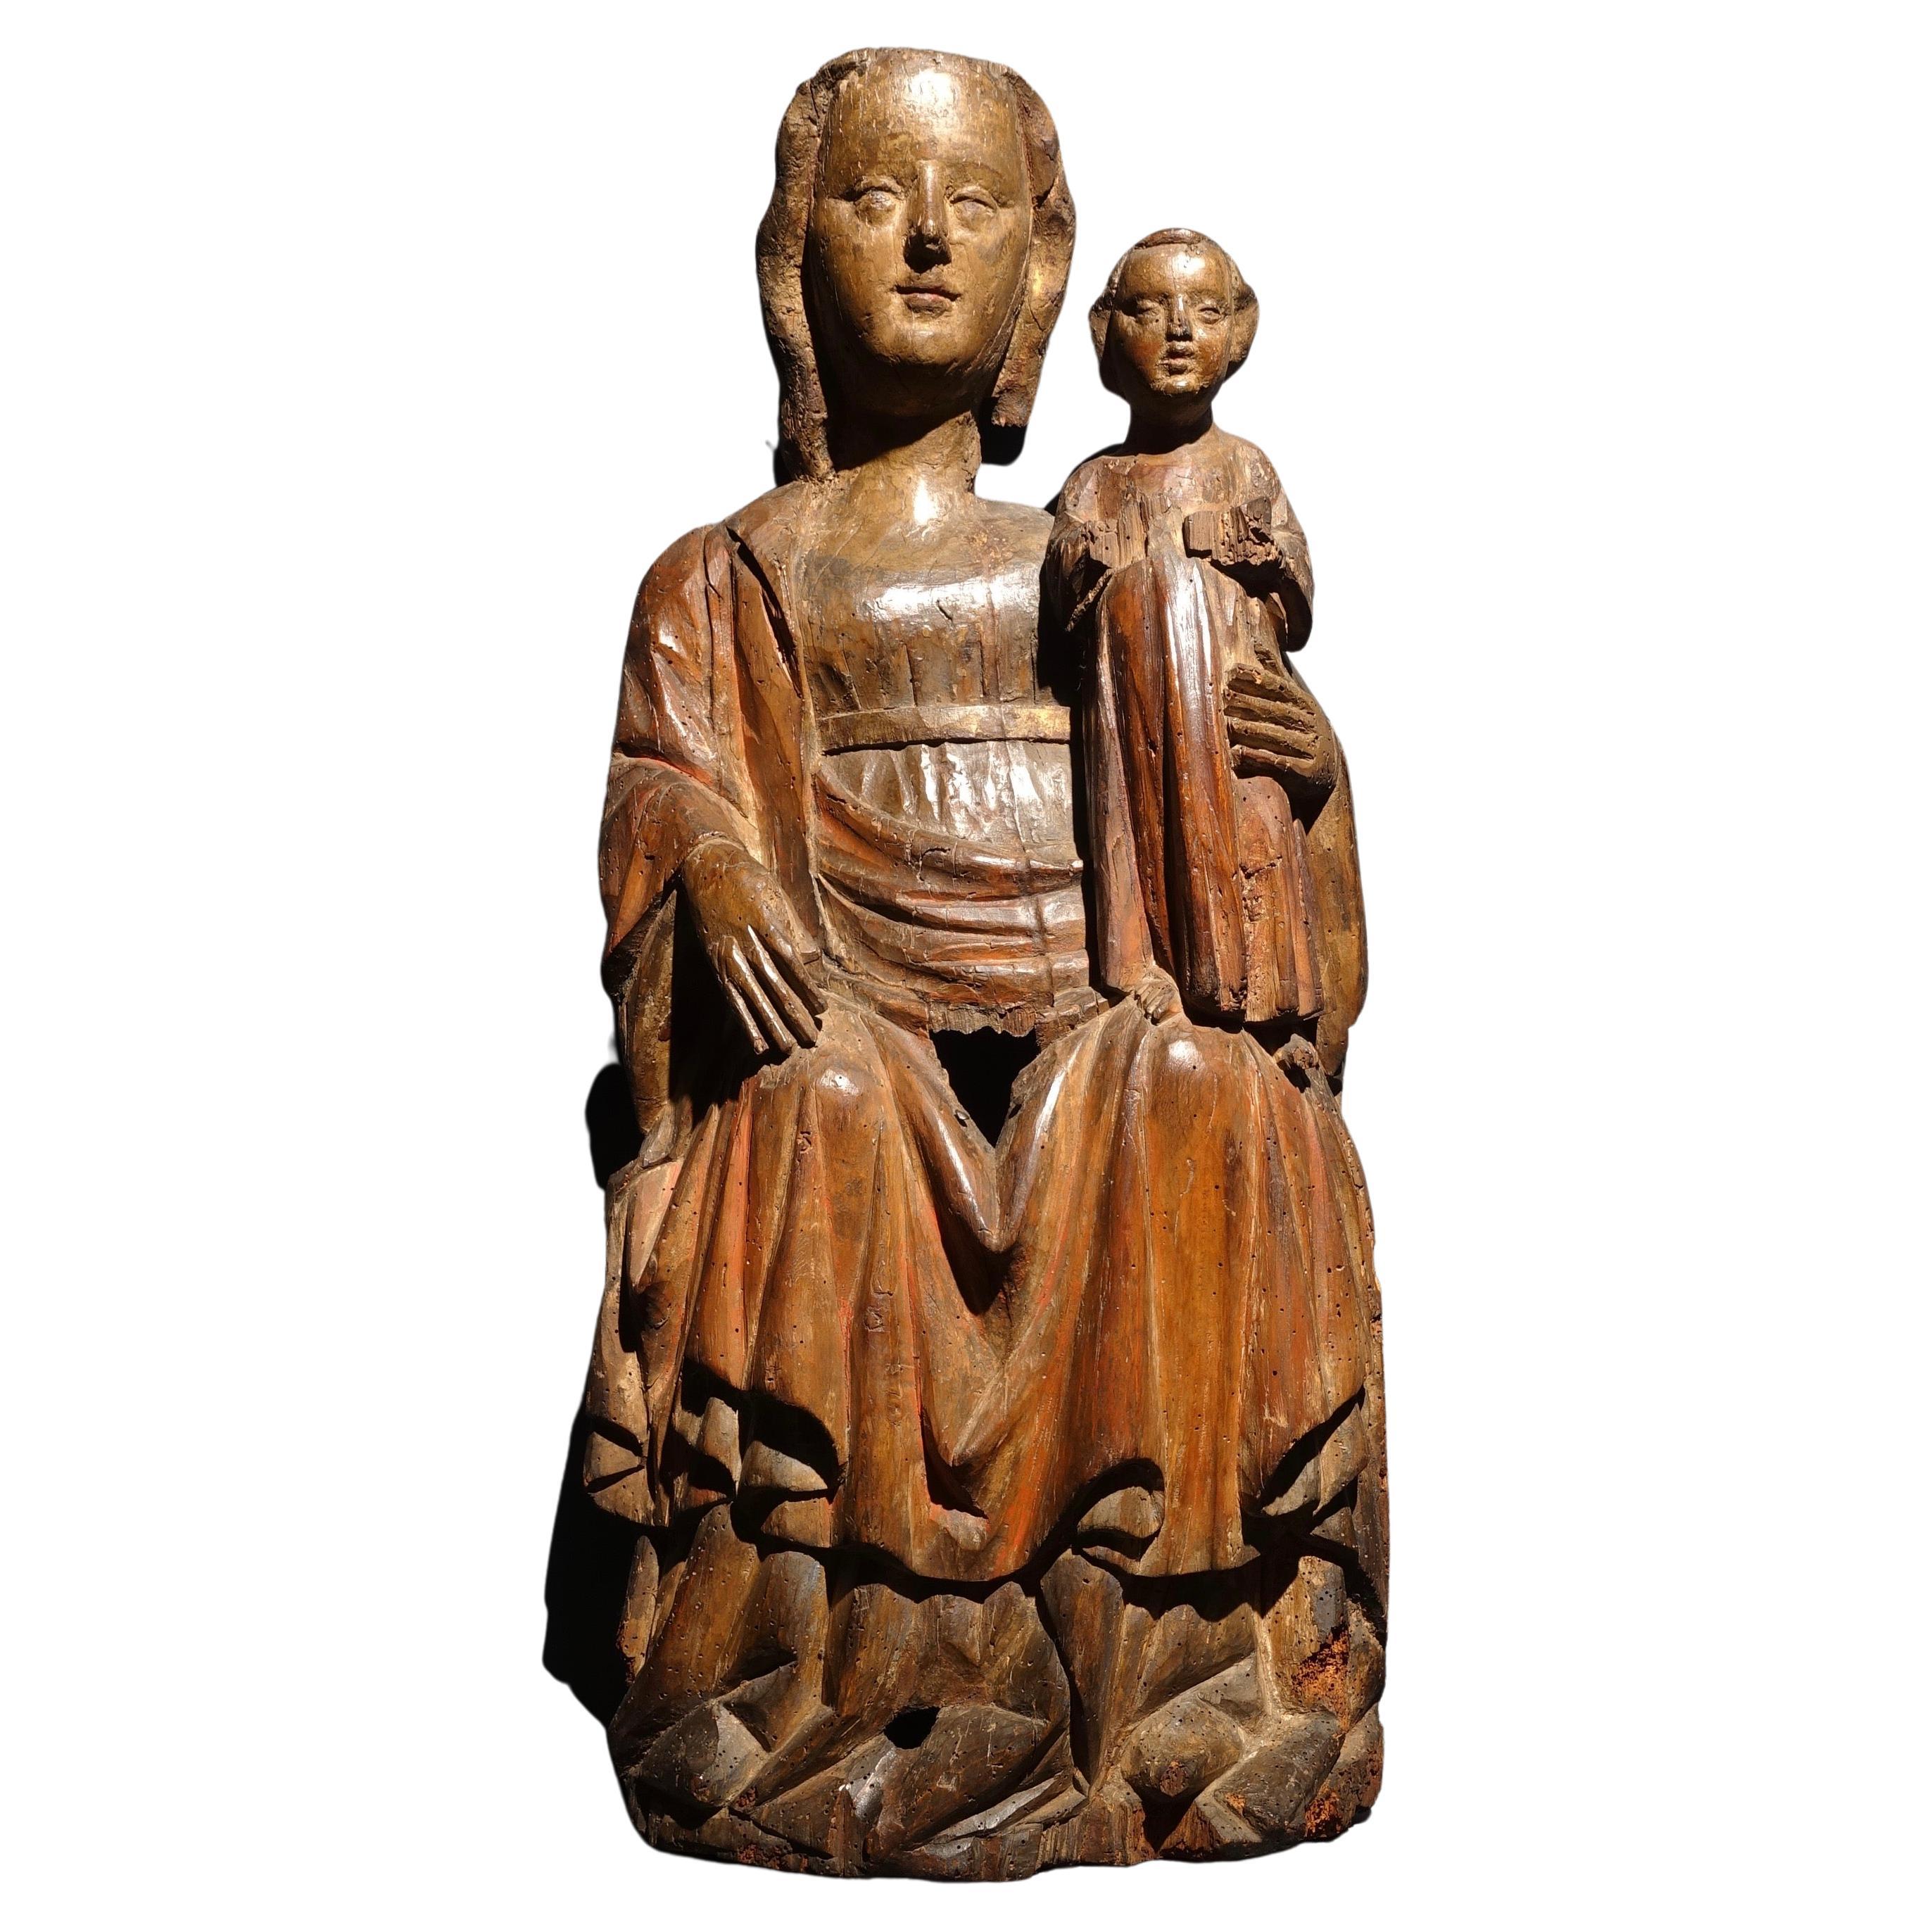 A polychrome sculpture depicting the Virgin and the Child 
Mosan region, second half of 13th century
Polychrome wood
73 x 29 X 12 cm

Provenance : 

Former Belgian private collection from the beginning of the 20th century 

This remarkable early